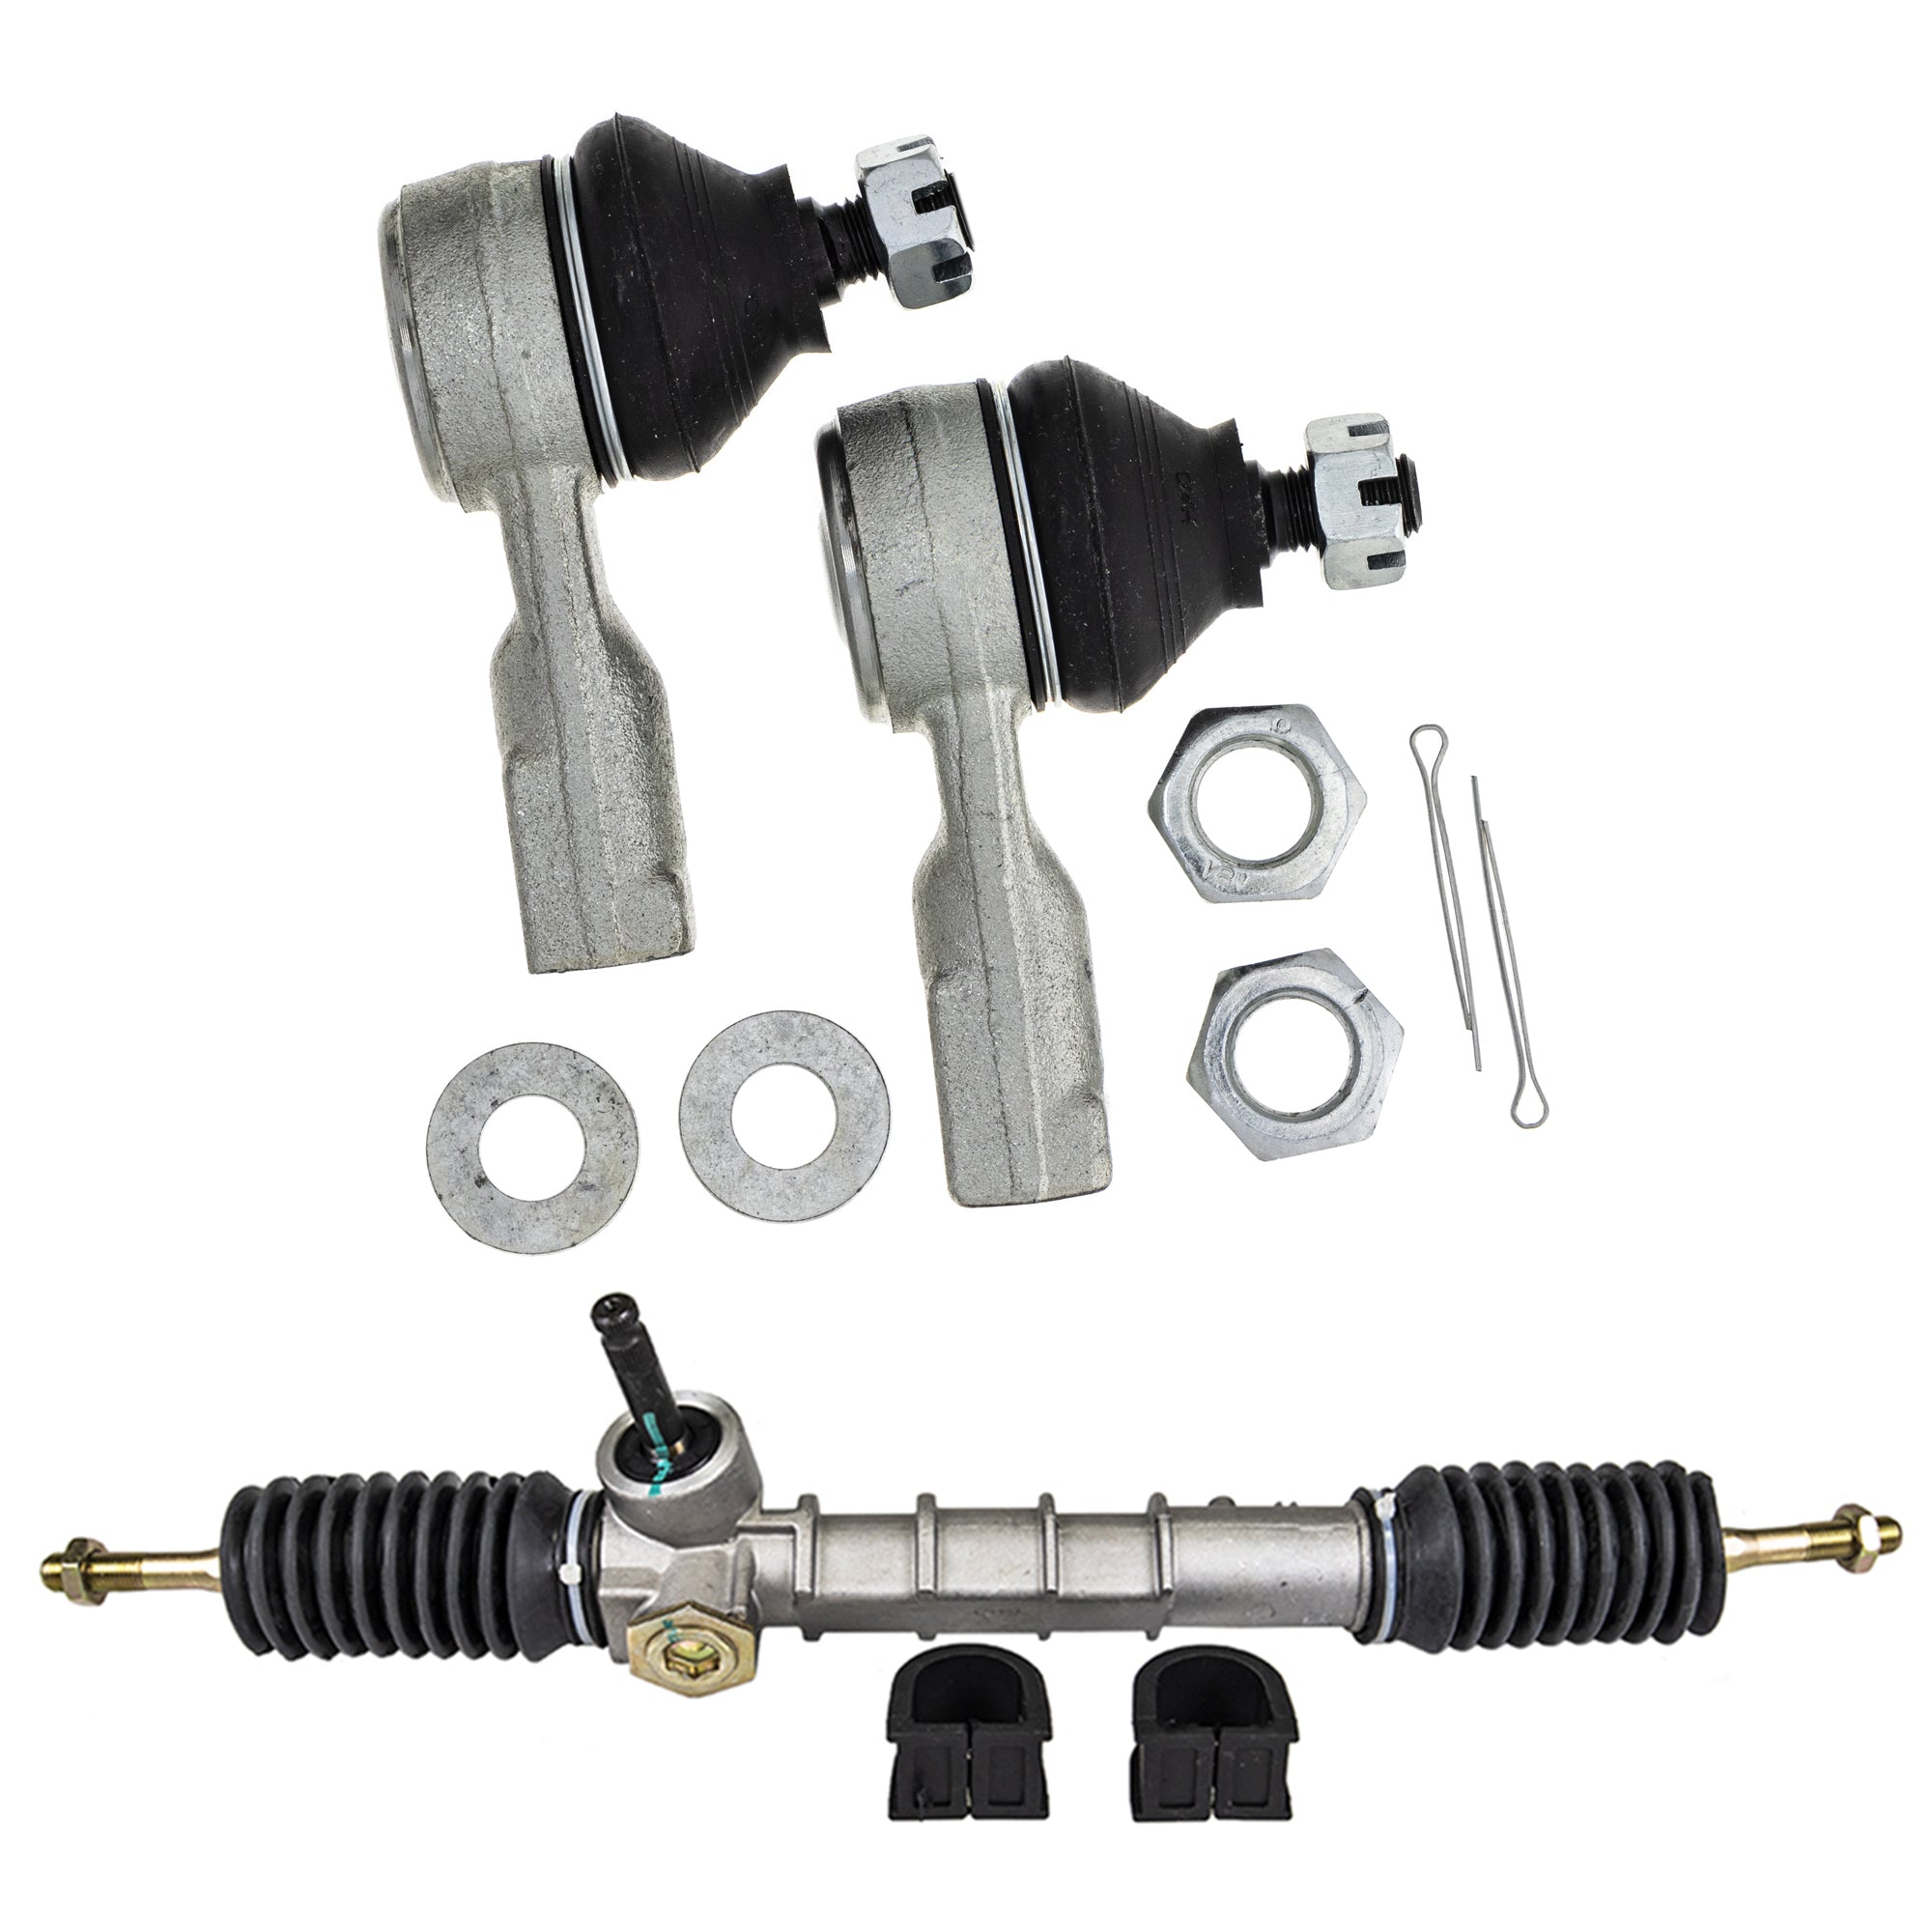 Steering Rack Assembly & Tie Rods Kit for zOTHER Kawasaki 39191-0021 39191-0022 NICHE MK1006181